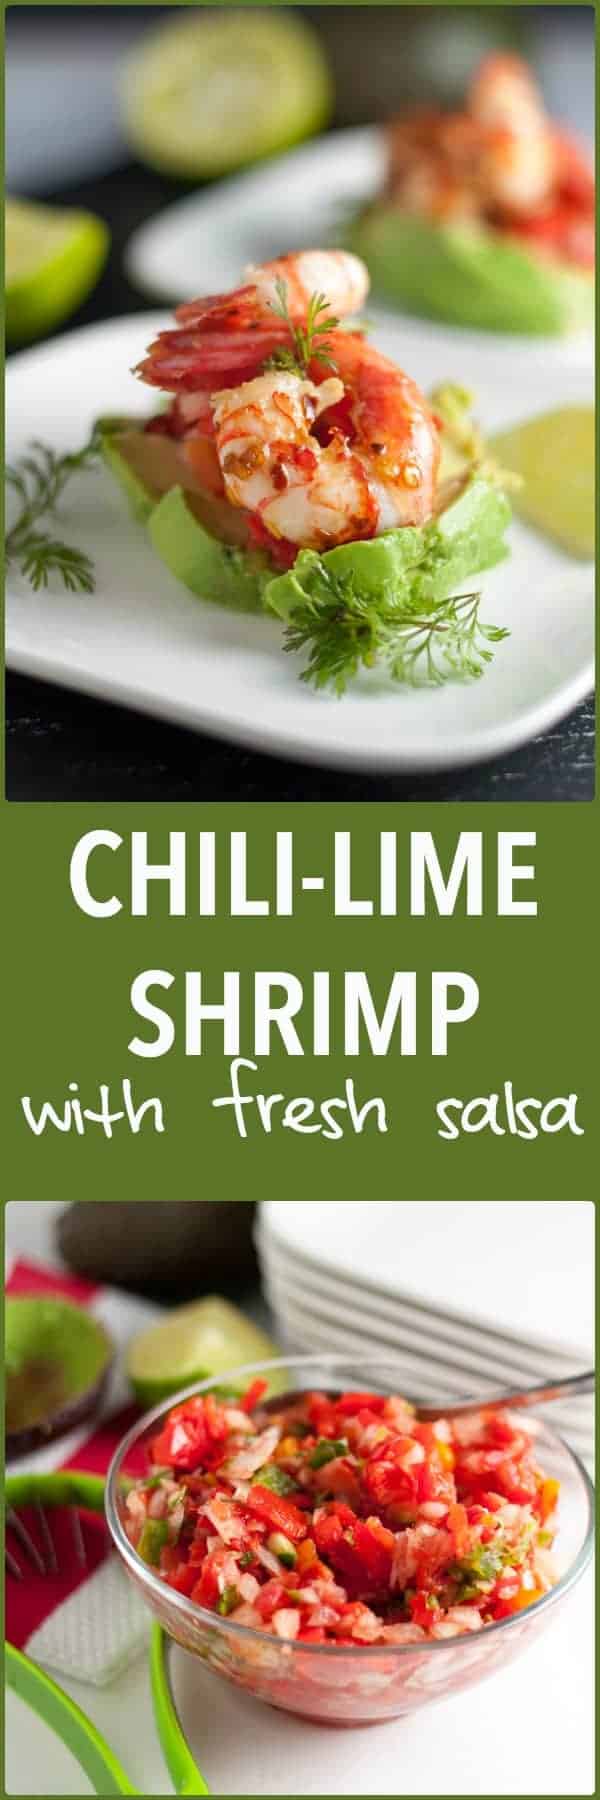 Succulent Grilled Chili Lime Shrimp with Fresh Salsa.